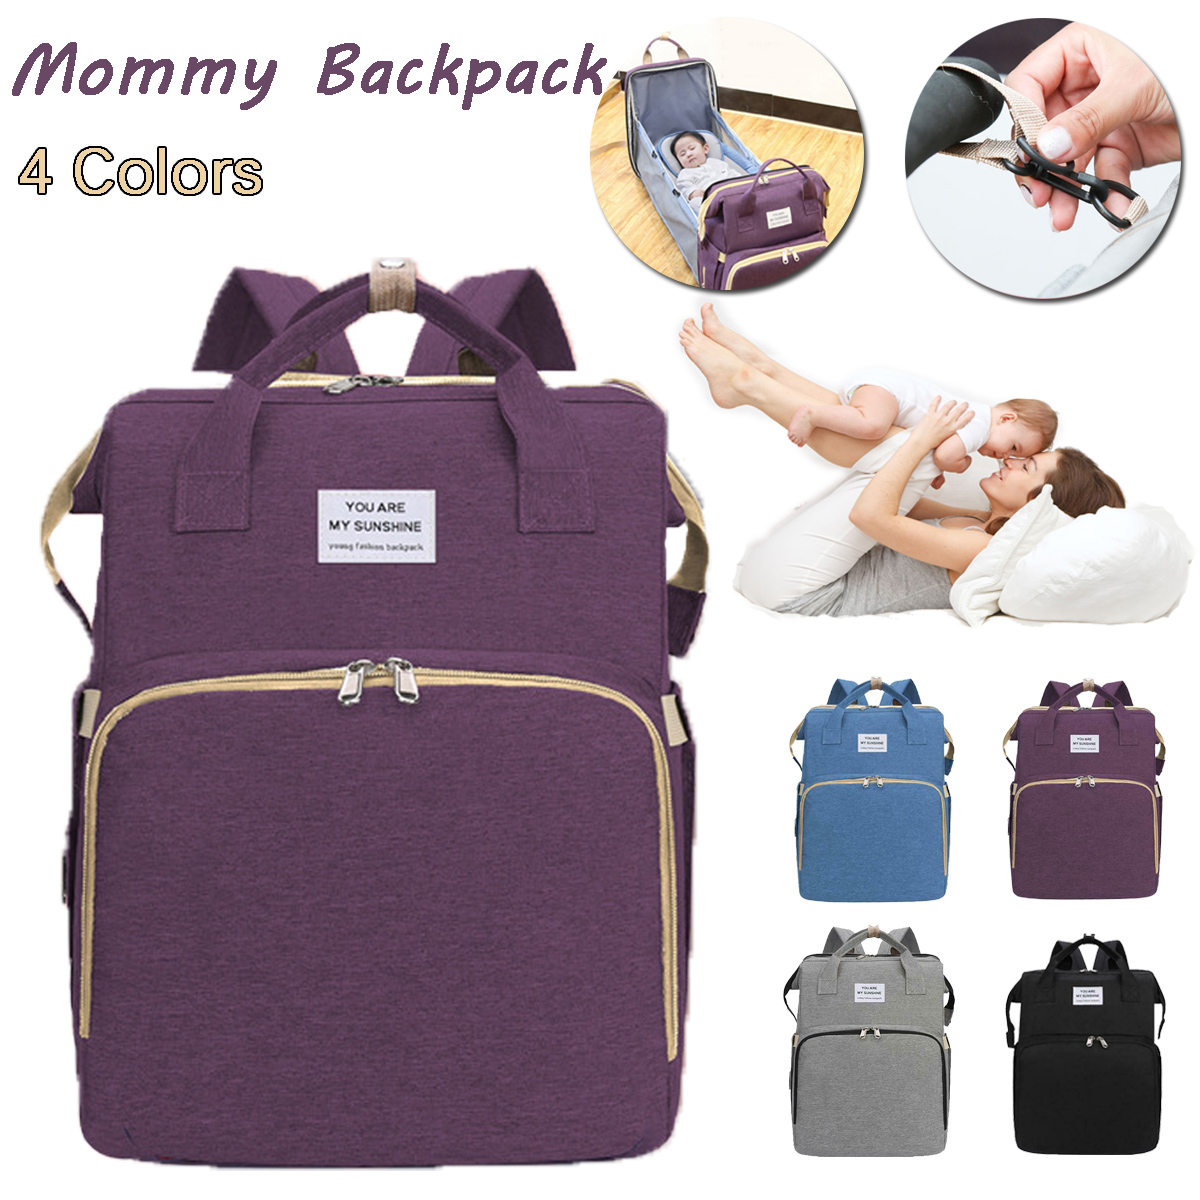 Portable-Diaper-Bag-Folding-Baby-Travel-Large-Backapack-Outdoor-Foldable-Baby-Bed-Mommy-Bags-1759461-3